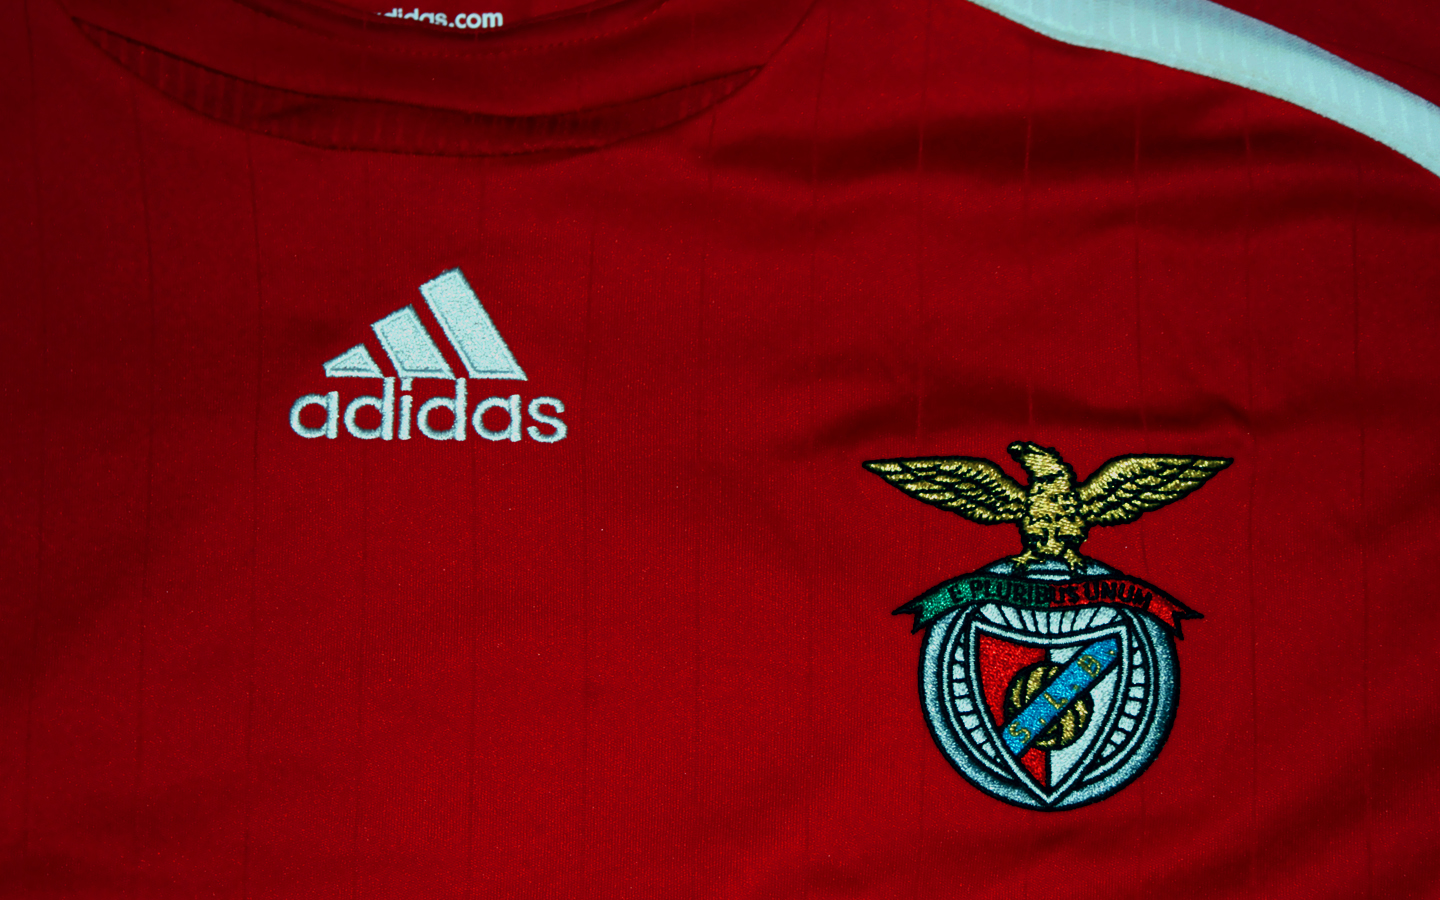 Sports S.L. Benfica HD Wallpapers. 